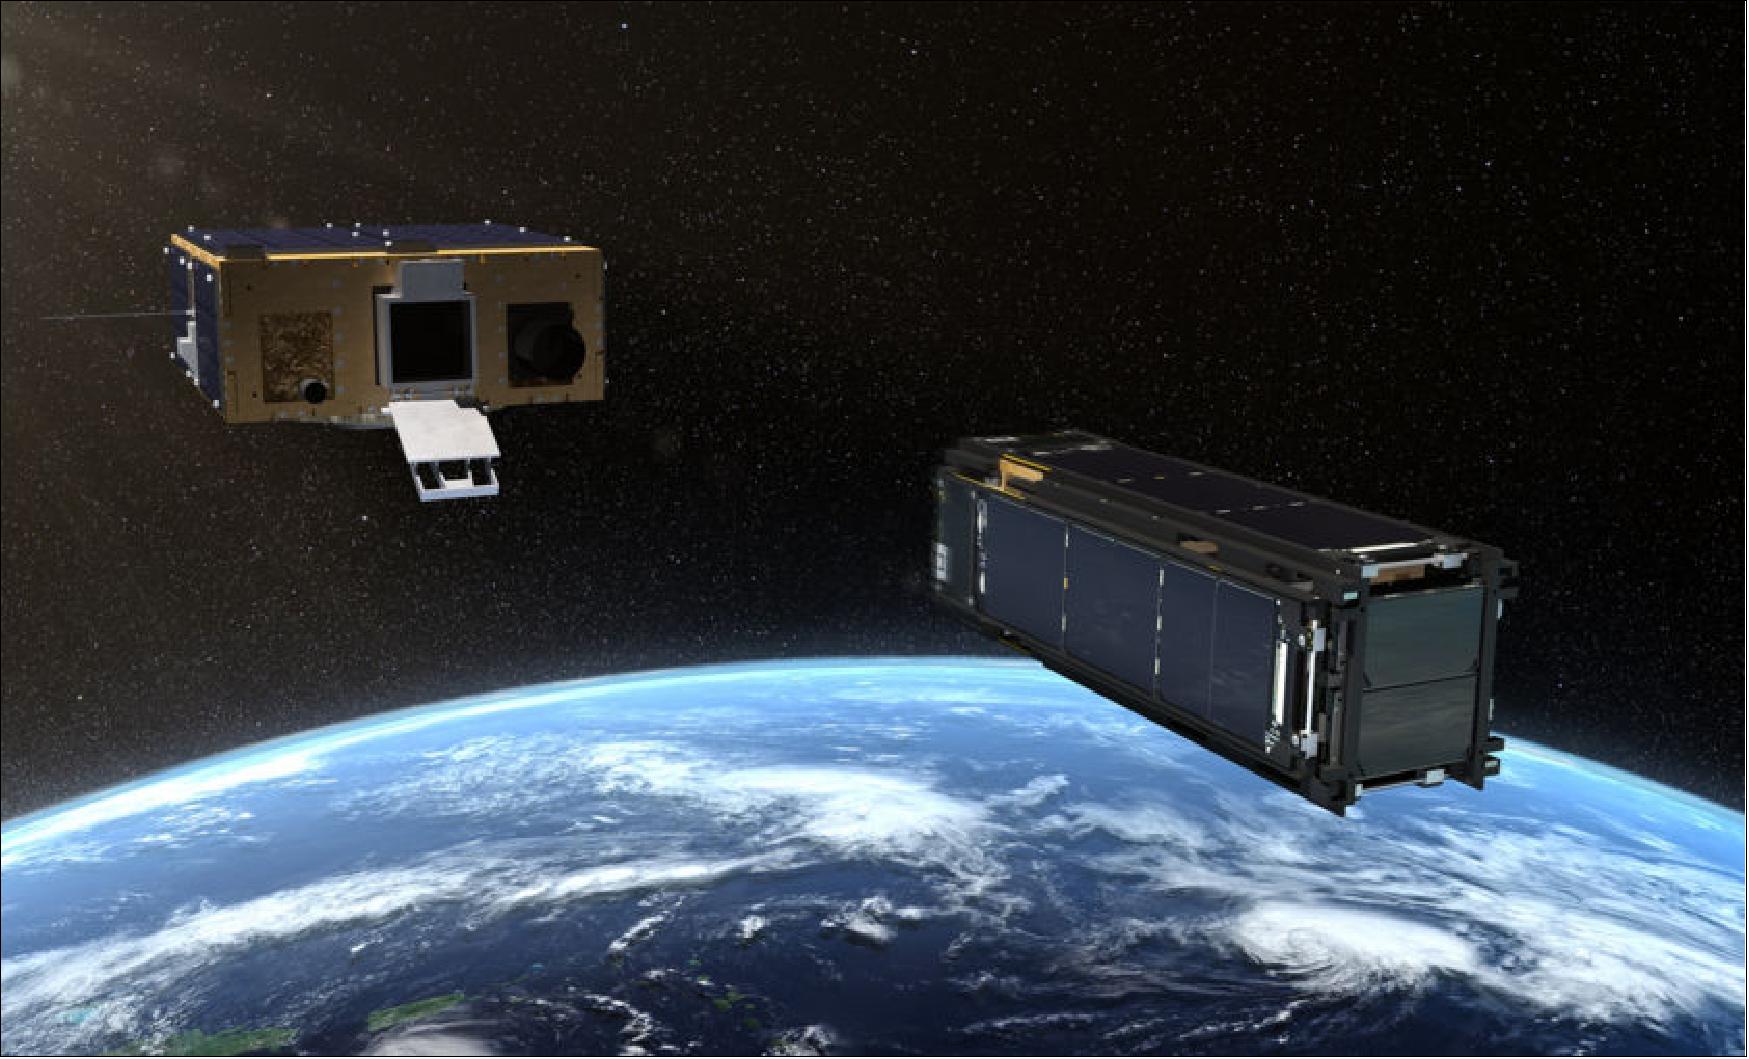 Figure 3: Prox-1 deploys the LightSail-2 spacecraft in Earth orbit (image credit: Josh Spradling / The Planetary Society)